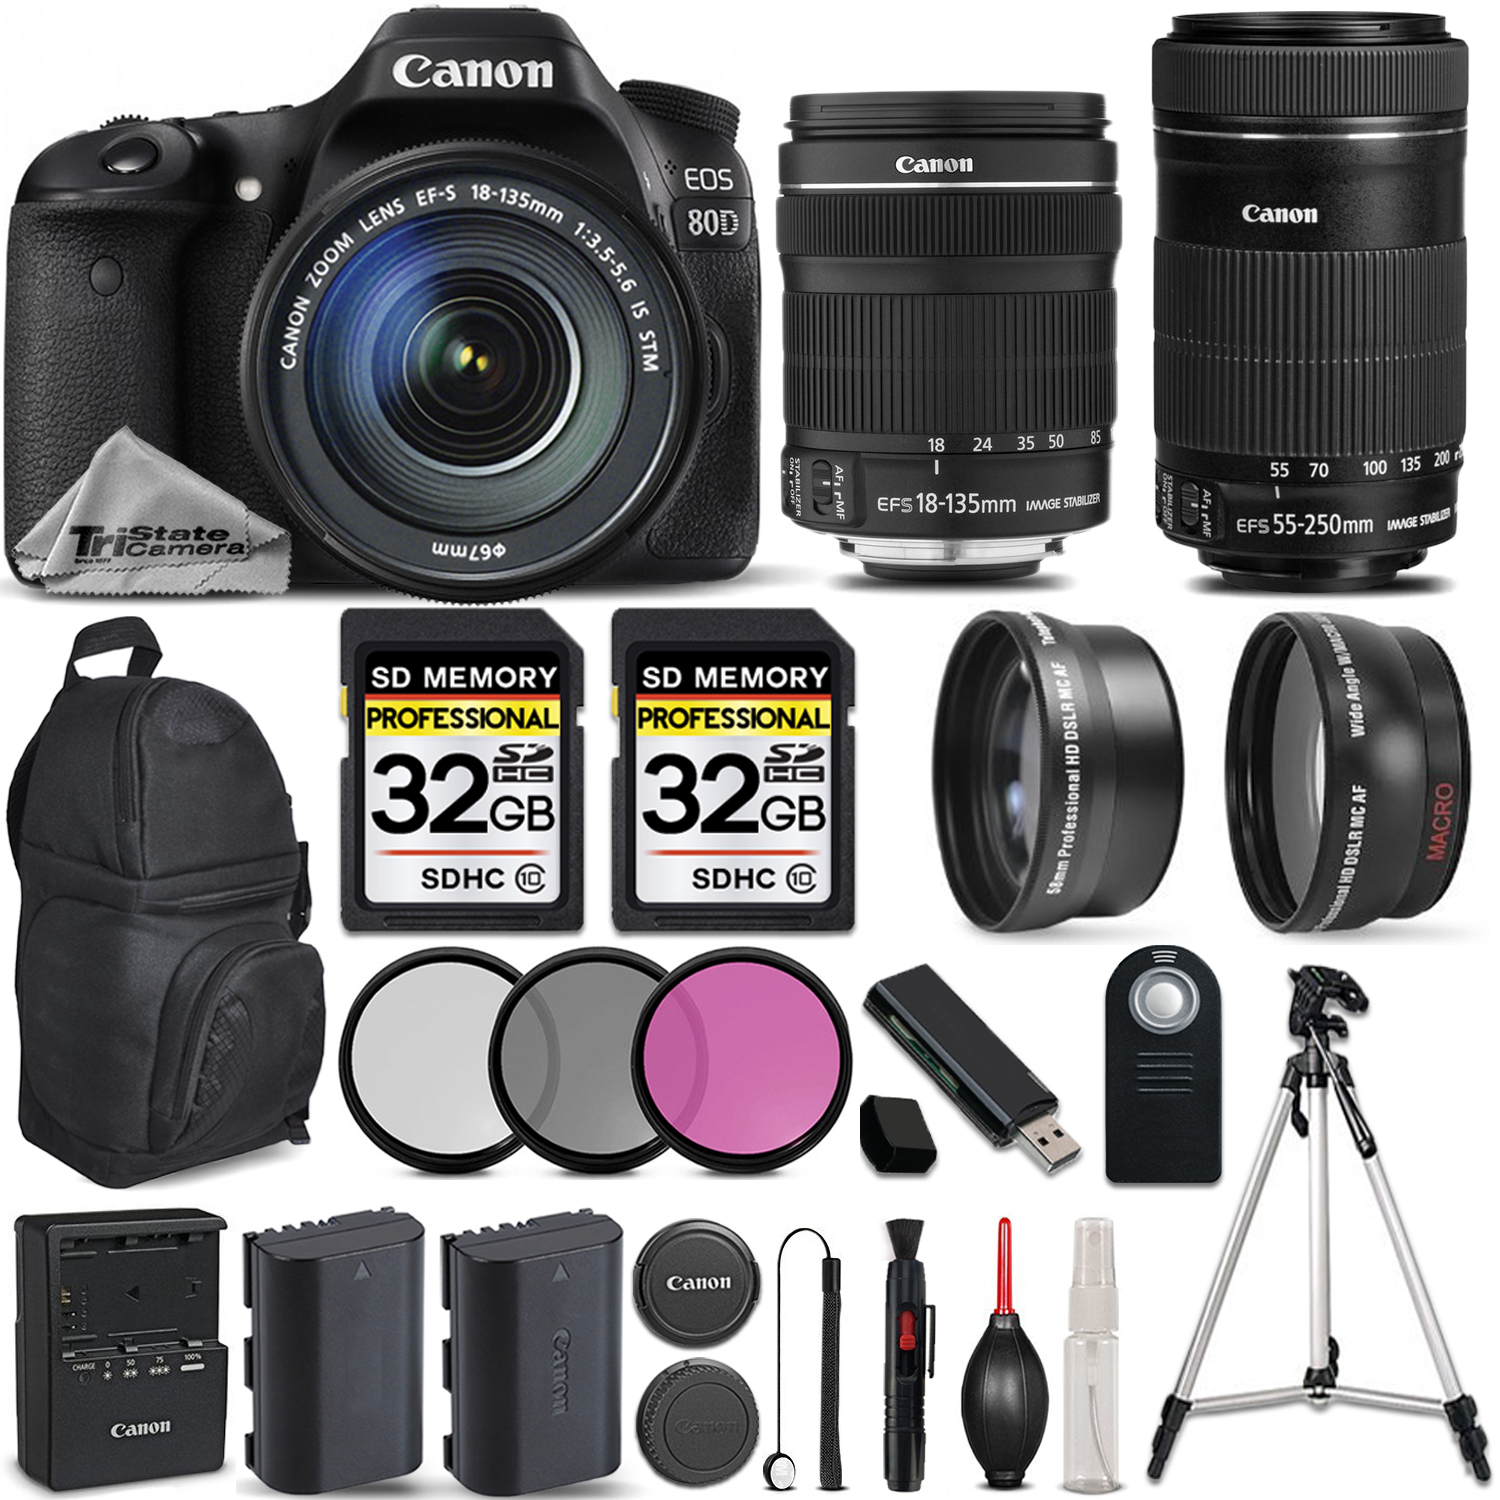 EOS 80D DSLR Camera + 18-135mm IS Lens + Canon 55-250 IS STM - PRO KIT *FREE SHIPPING*